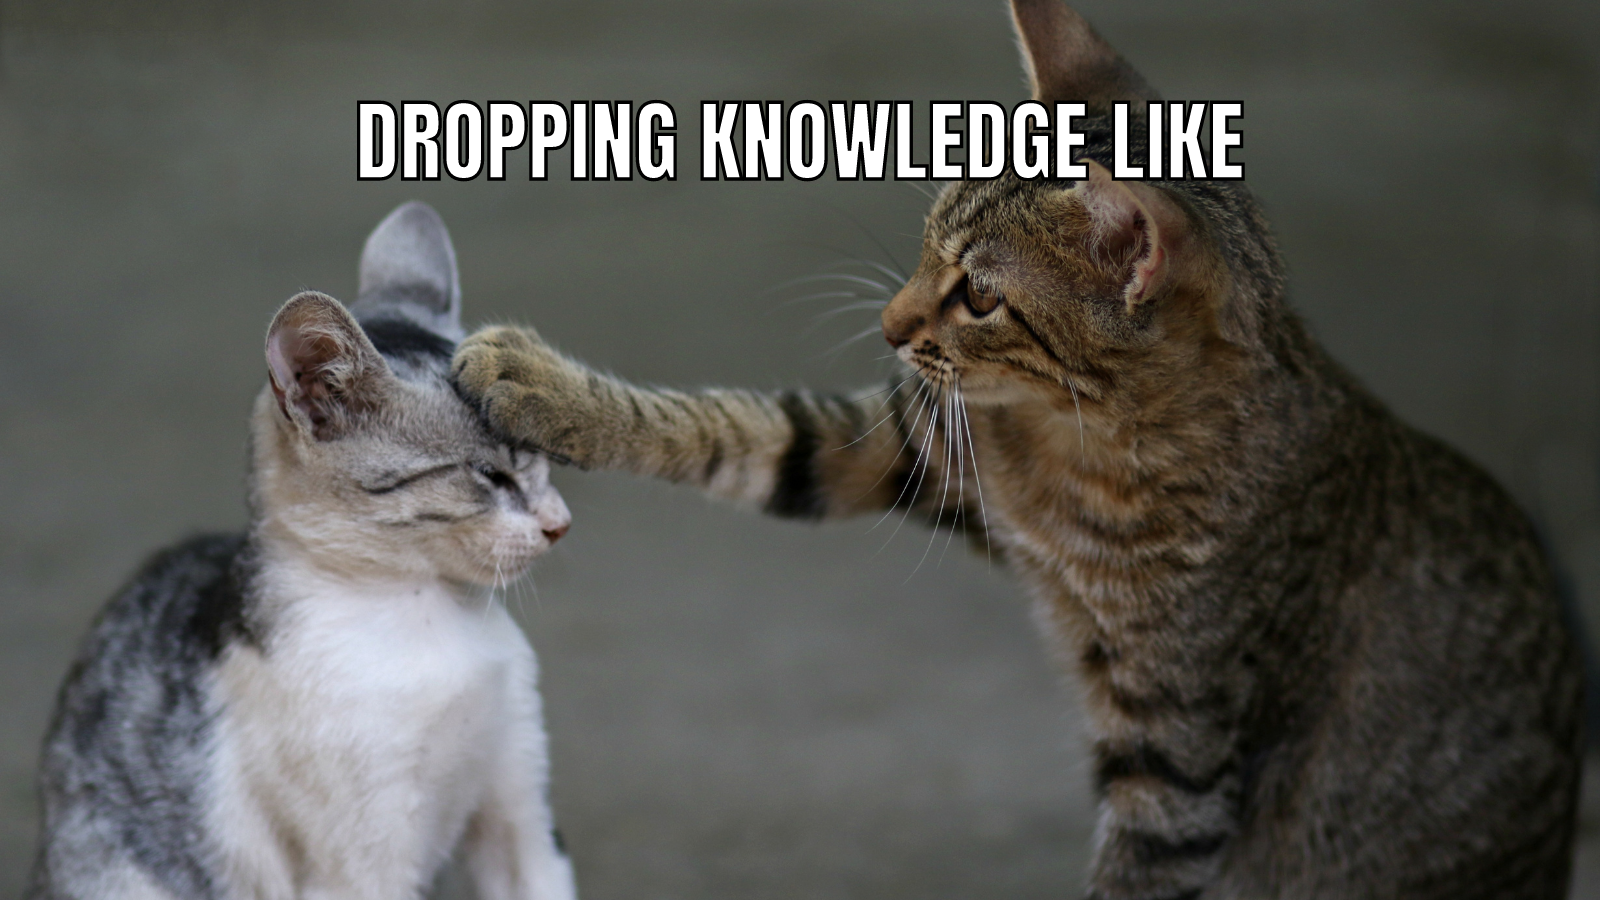 Cat on the right holding the head of the cat on the left with words dropping knowledge like